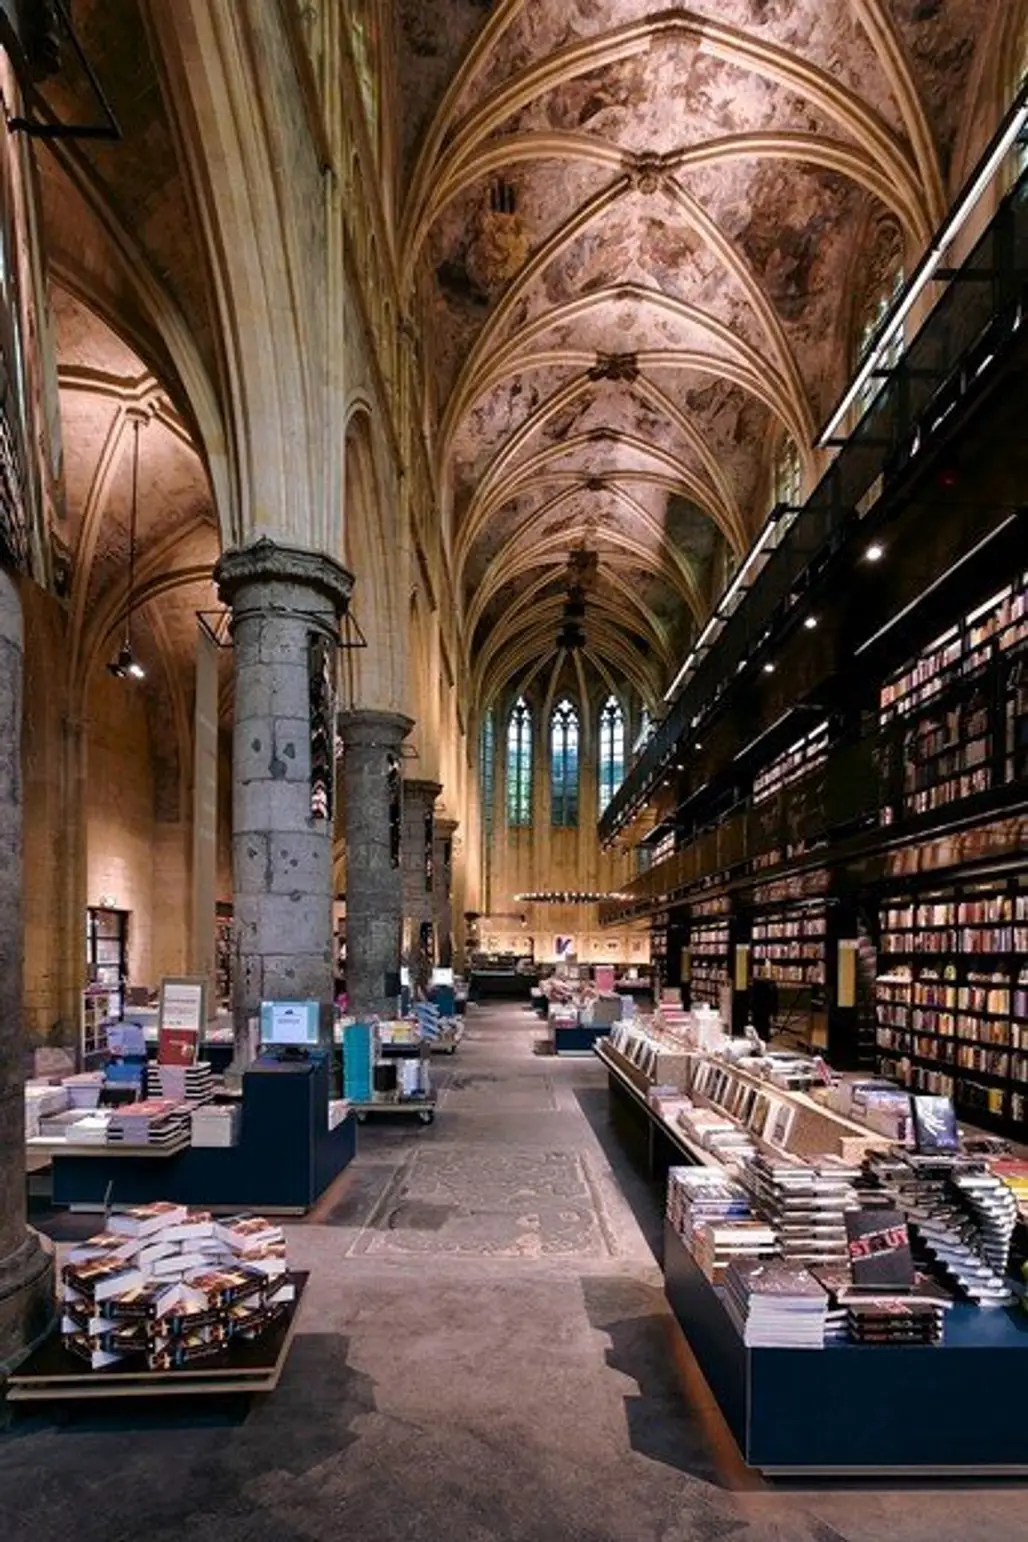 Lose Yourself for Hours Browsing the Shelves in the Selexyz Dominicane, a Bookshop in a Converted 13th Century Church